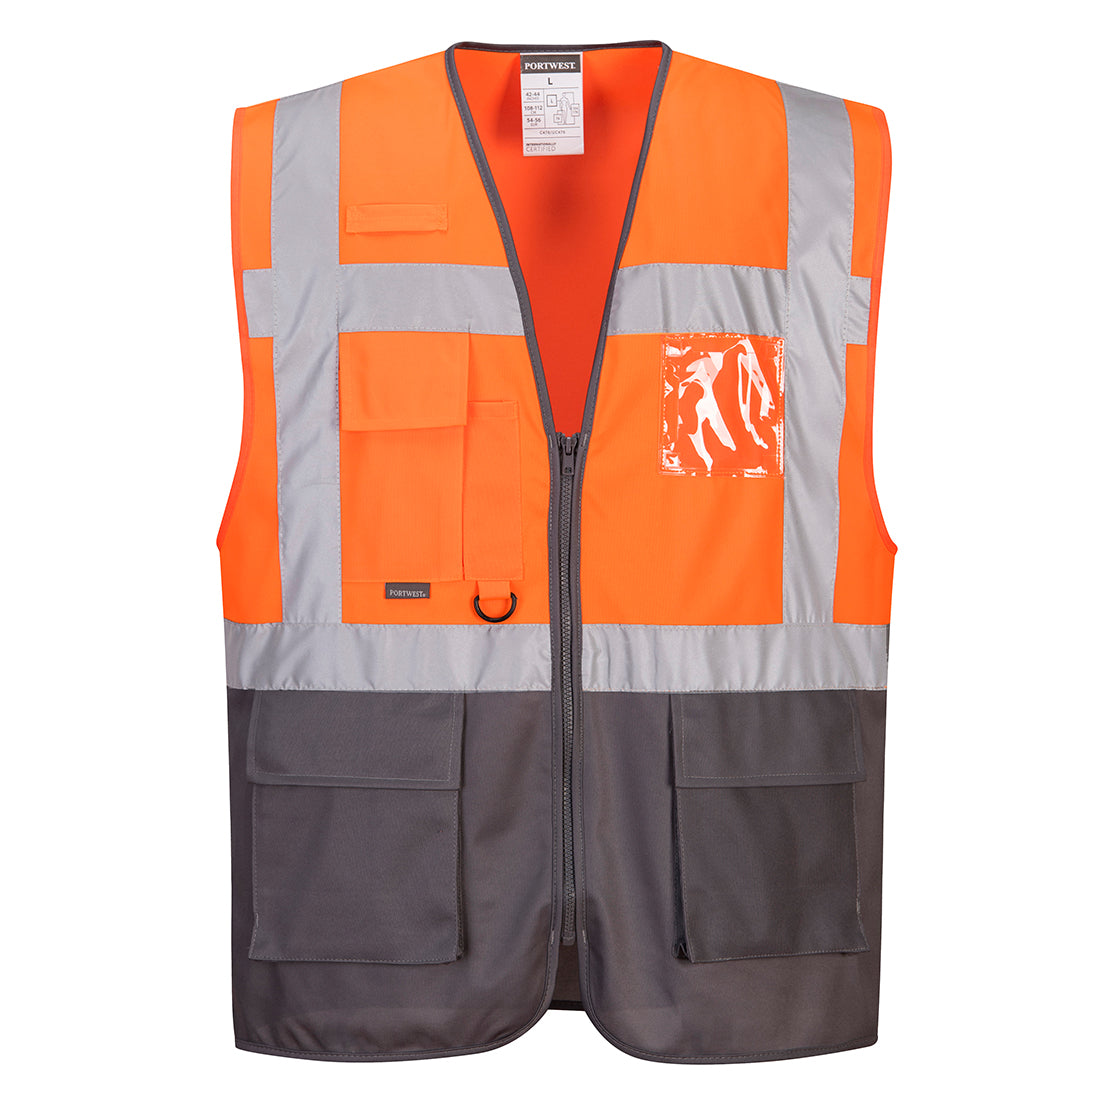 Warsaw Contrast Executive High Visibility Vest